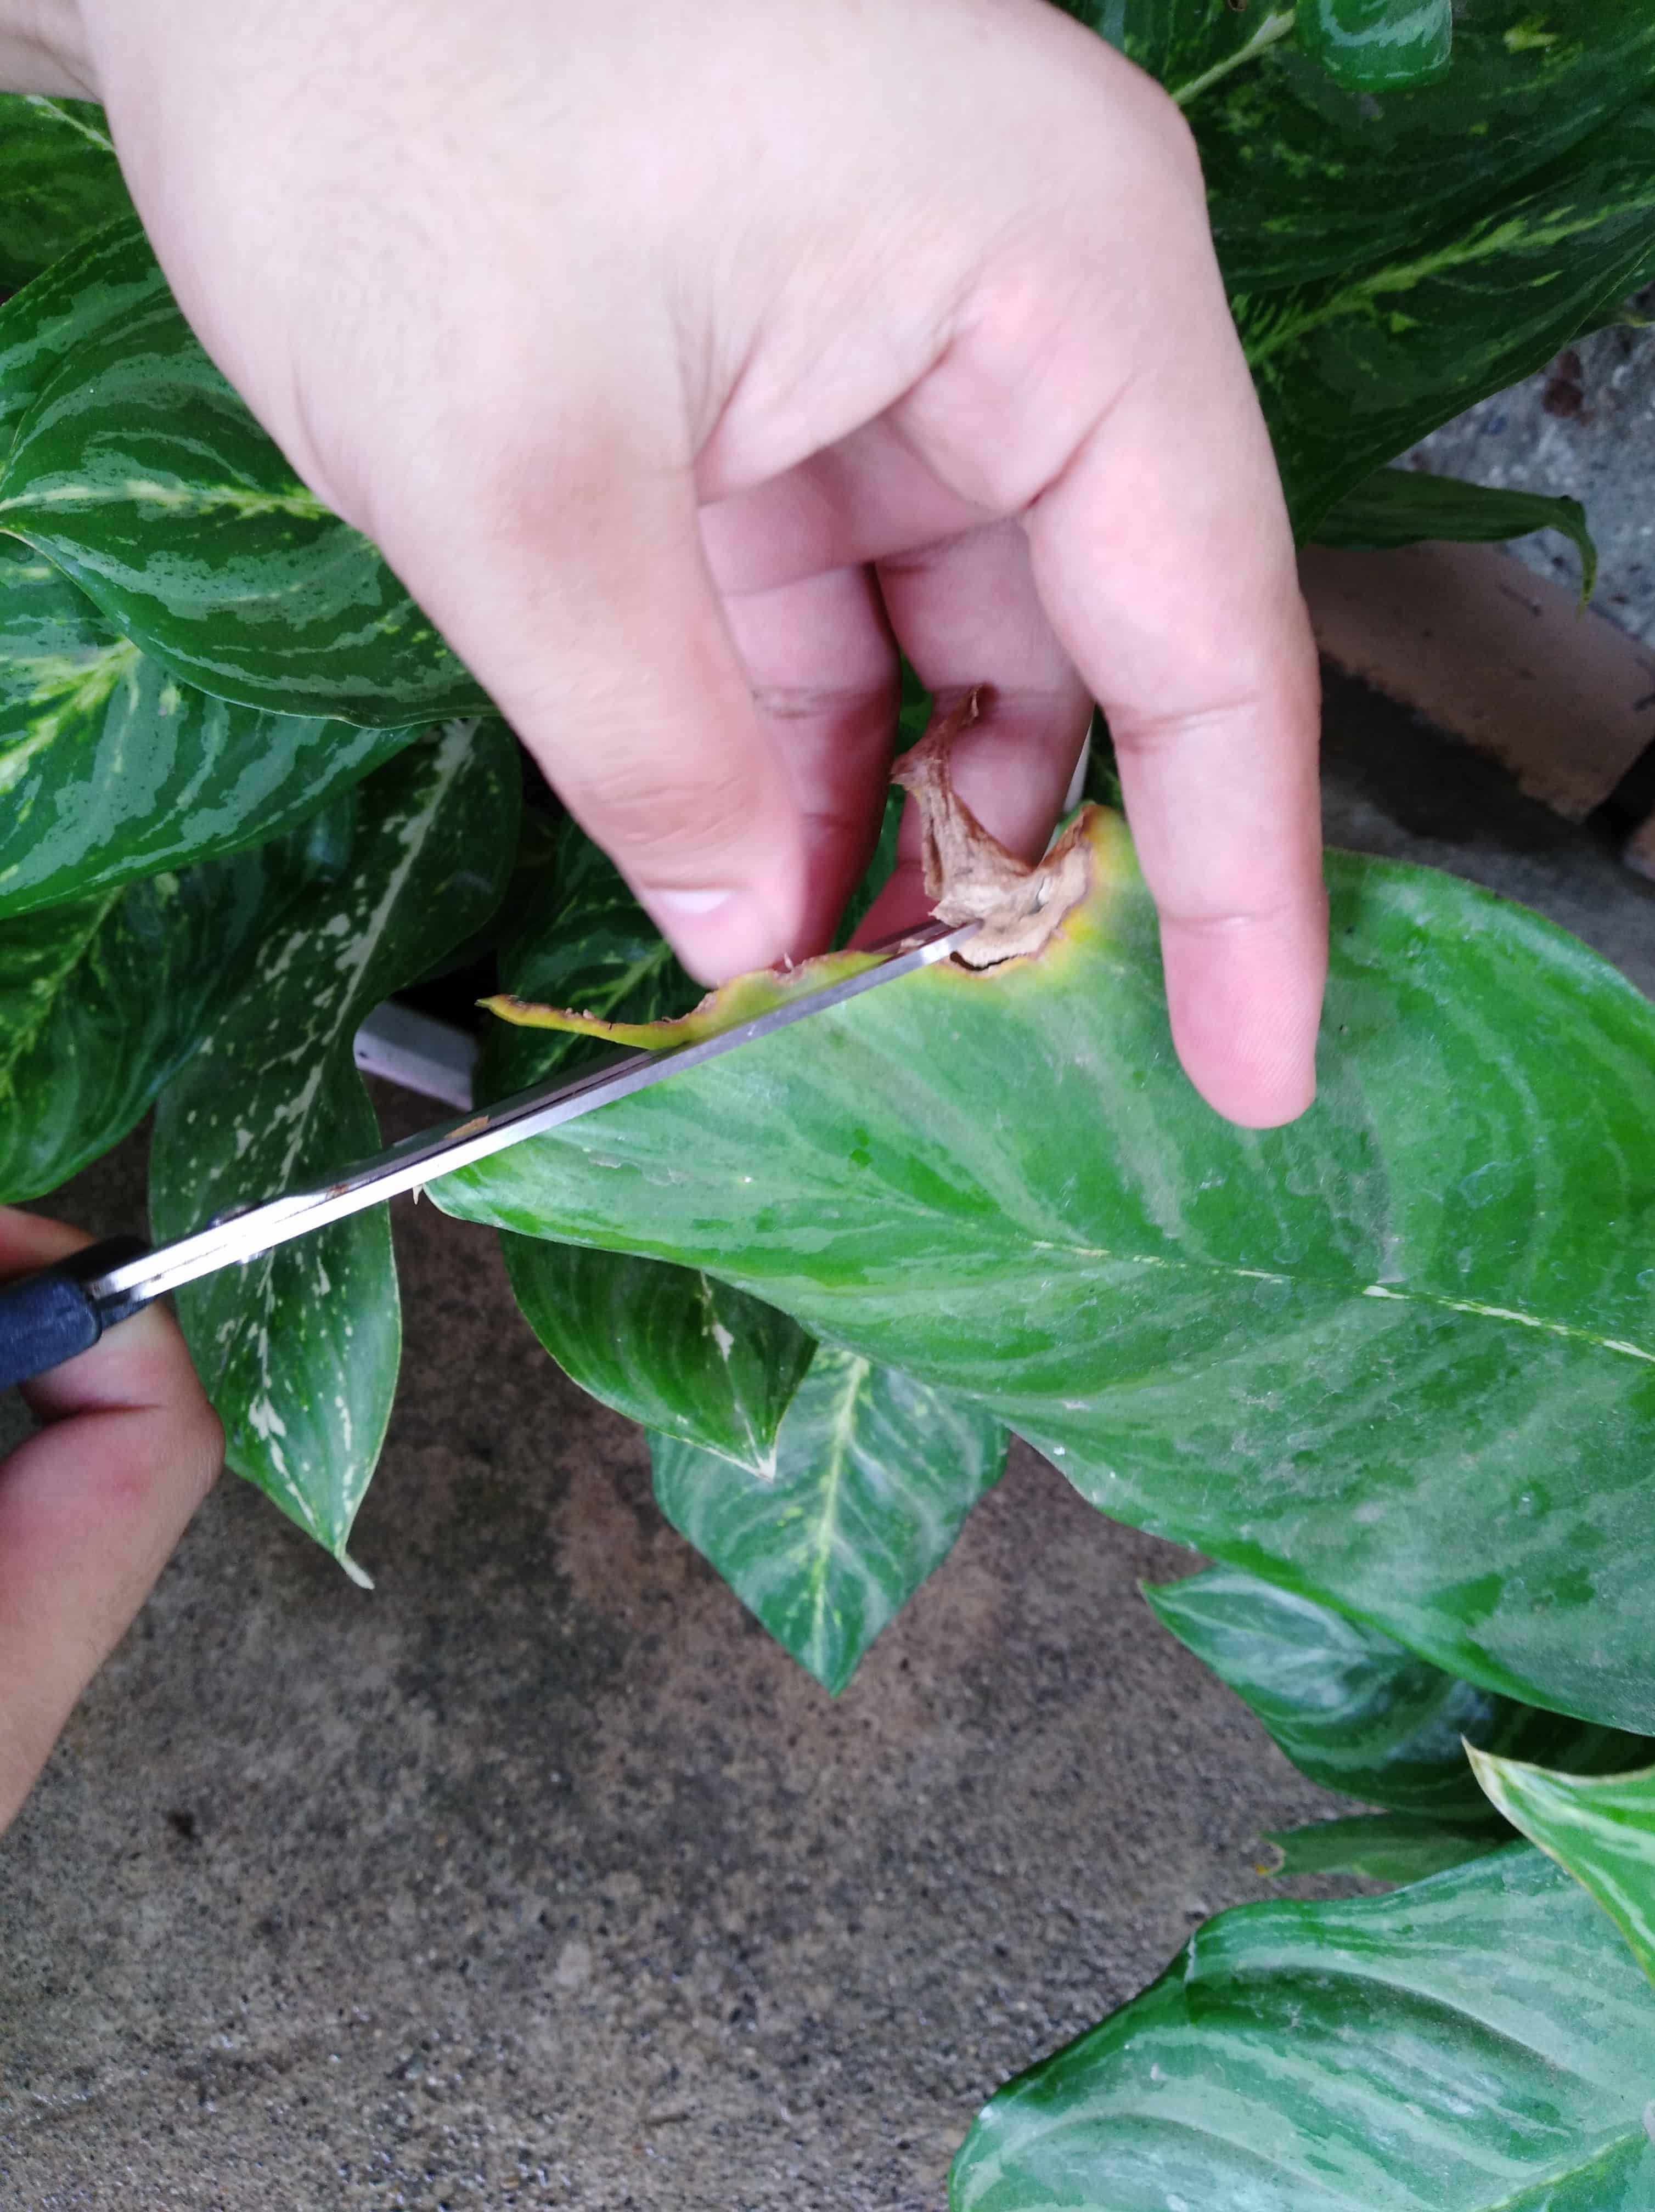 Trimming off a scorched and damaged part of a leaf.